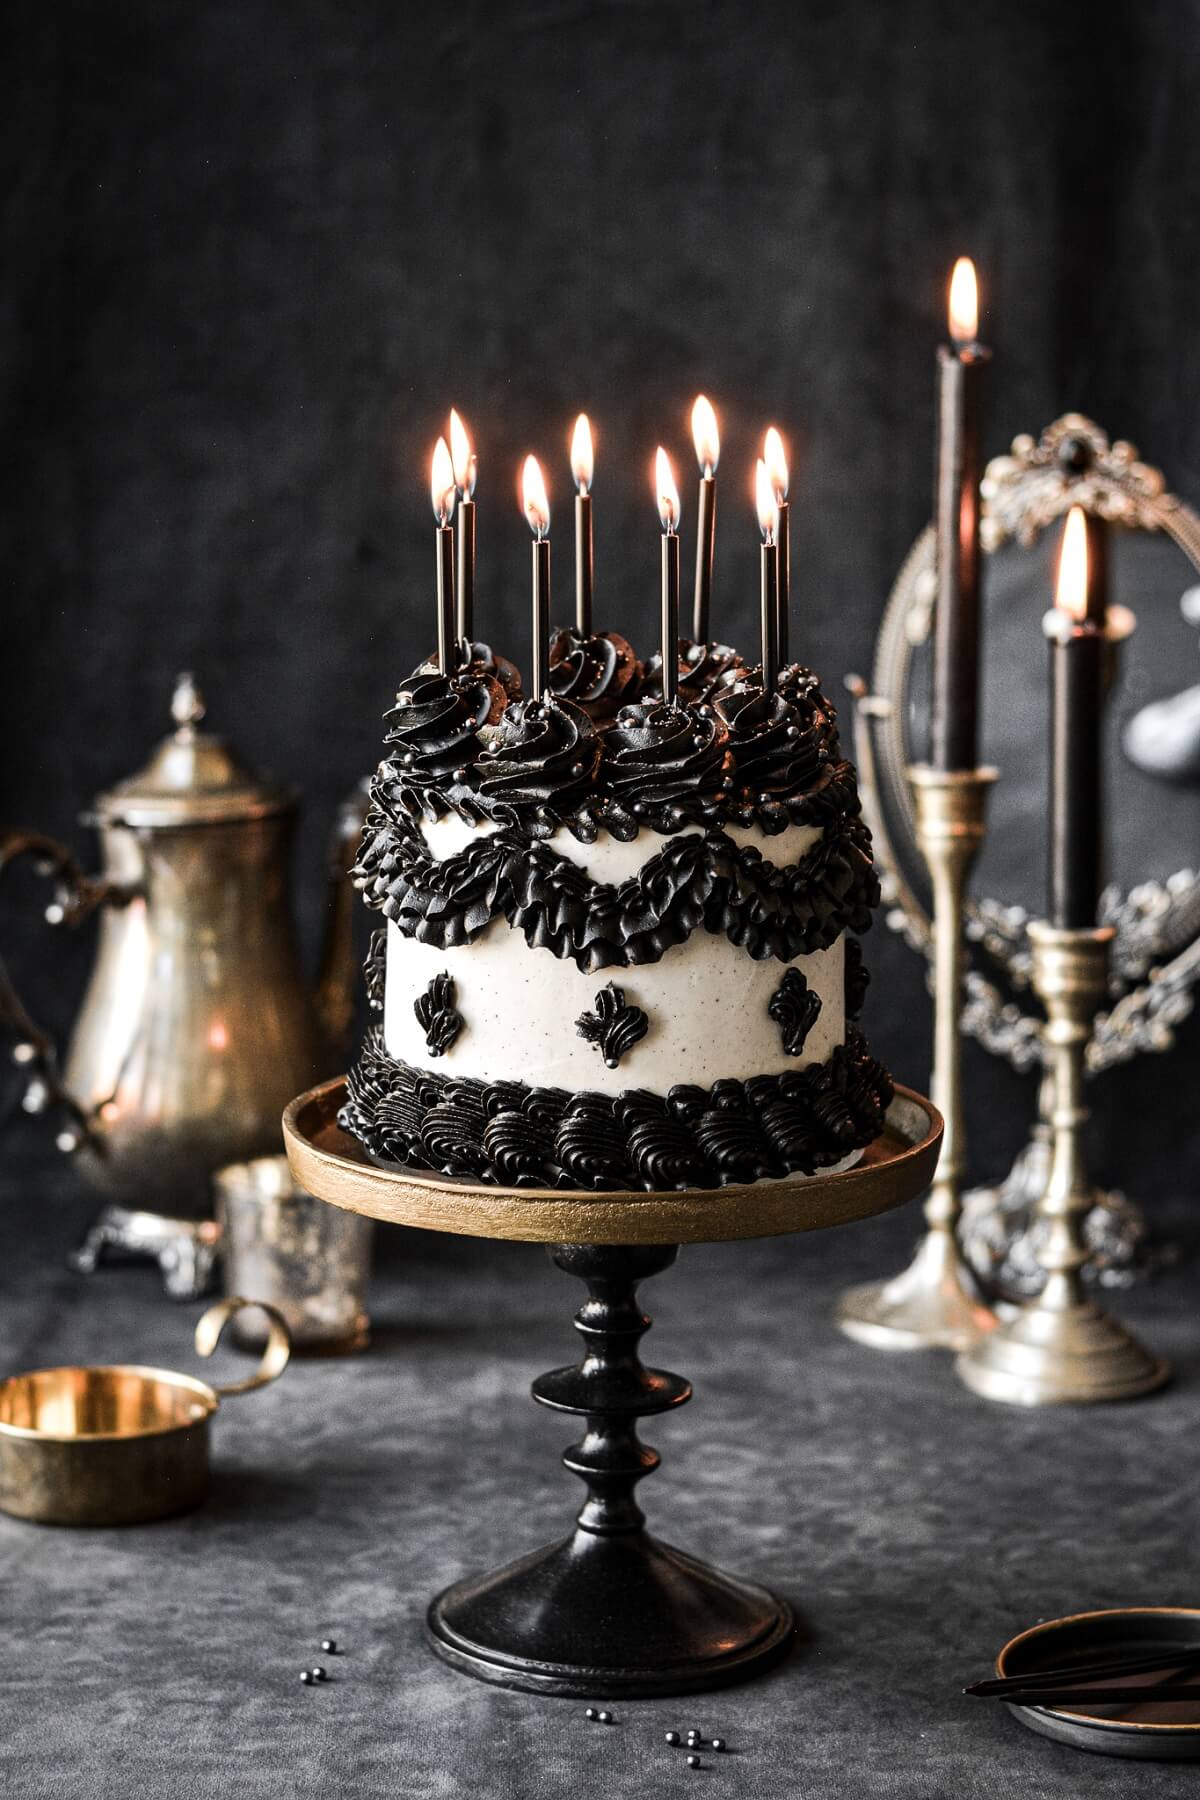 A gothic scene with a black and white Lambeth style cake topped with candles.